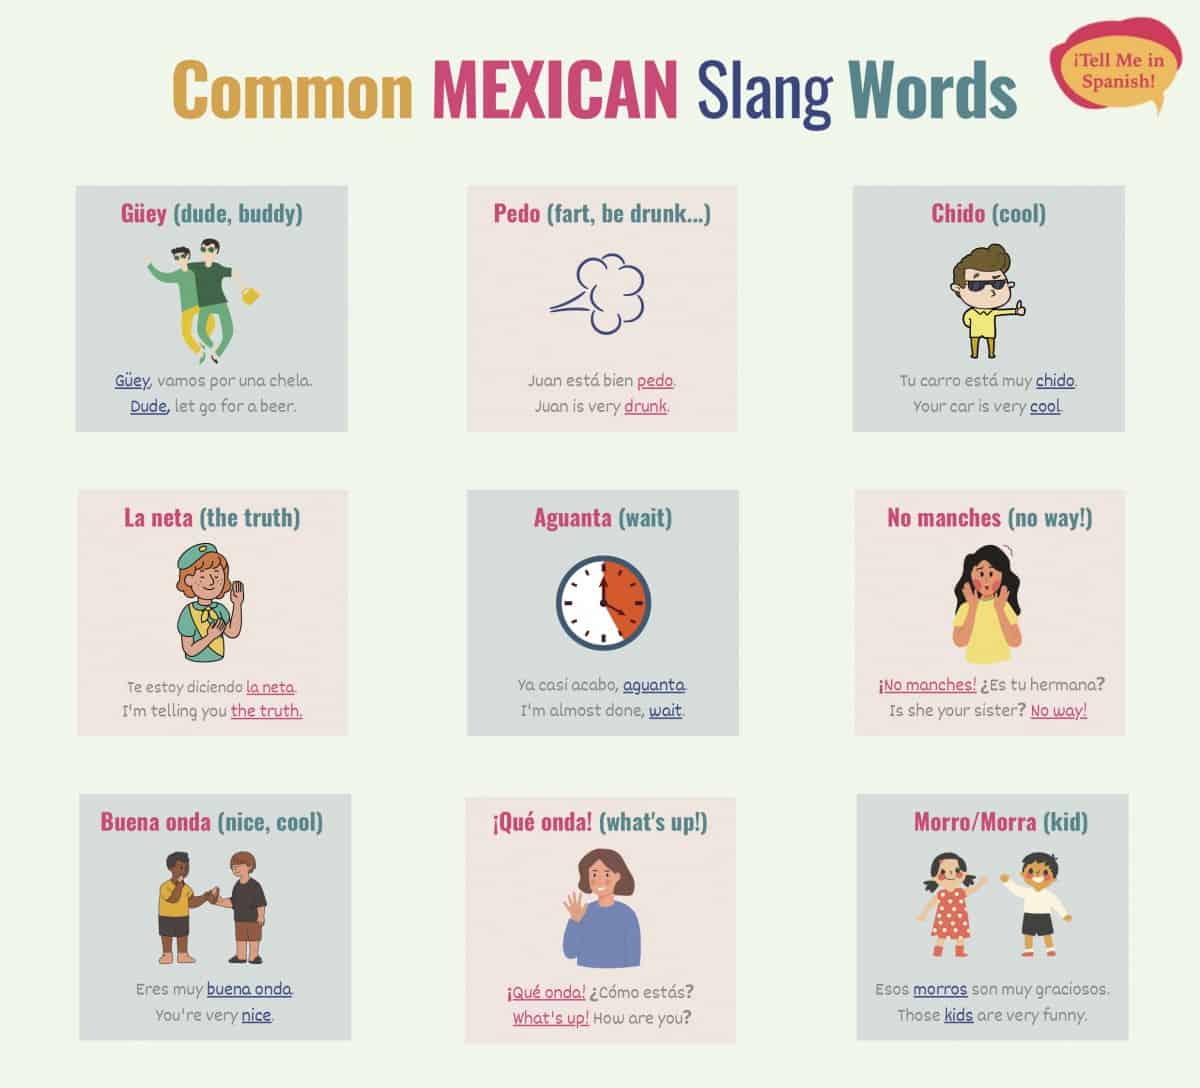 51 Mexican Slang Words To Sound Like a True Mexican